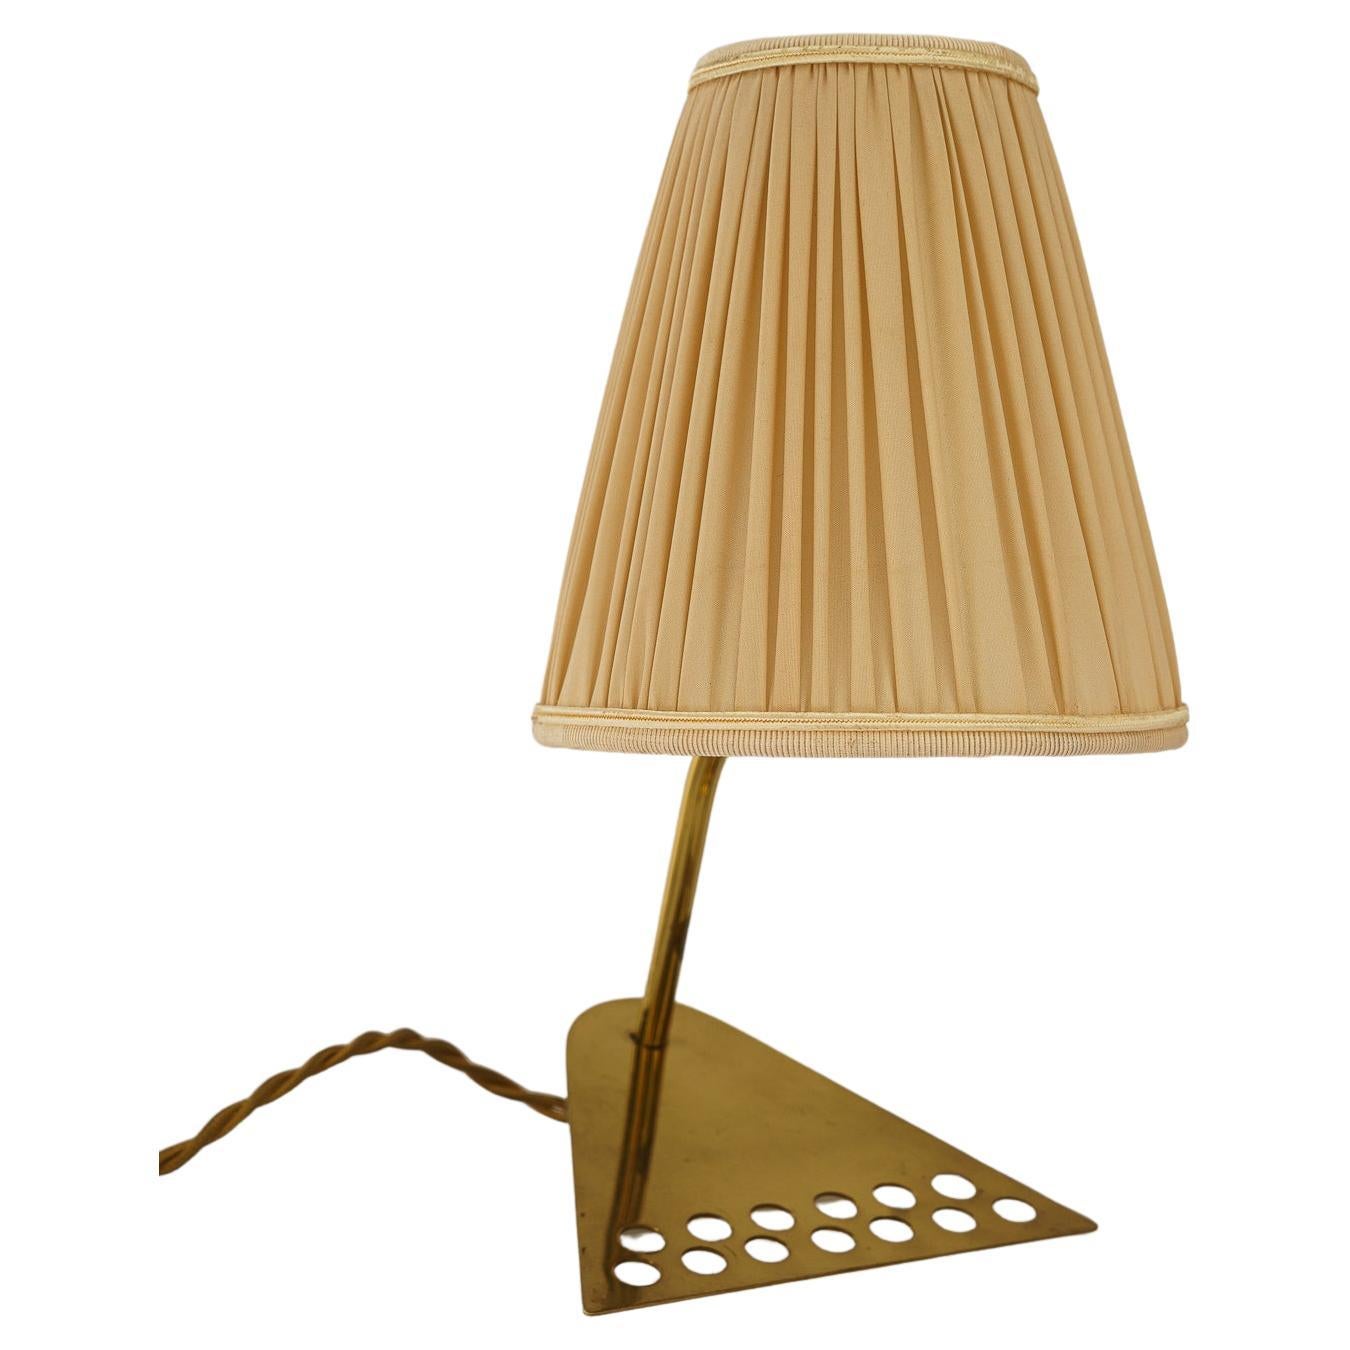 Rare rupert Nikoll table lamp with fabric shade vienna around 1950s For Sale